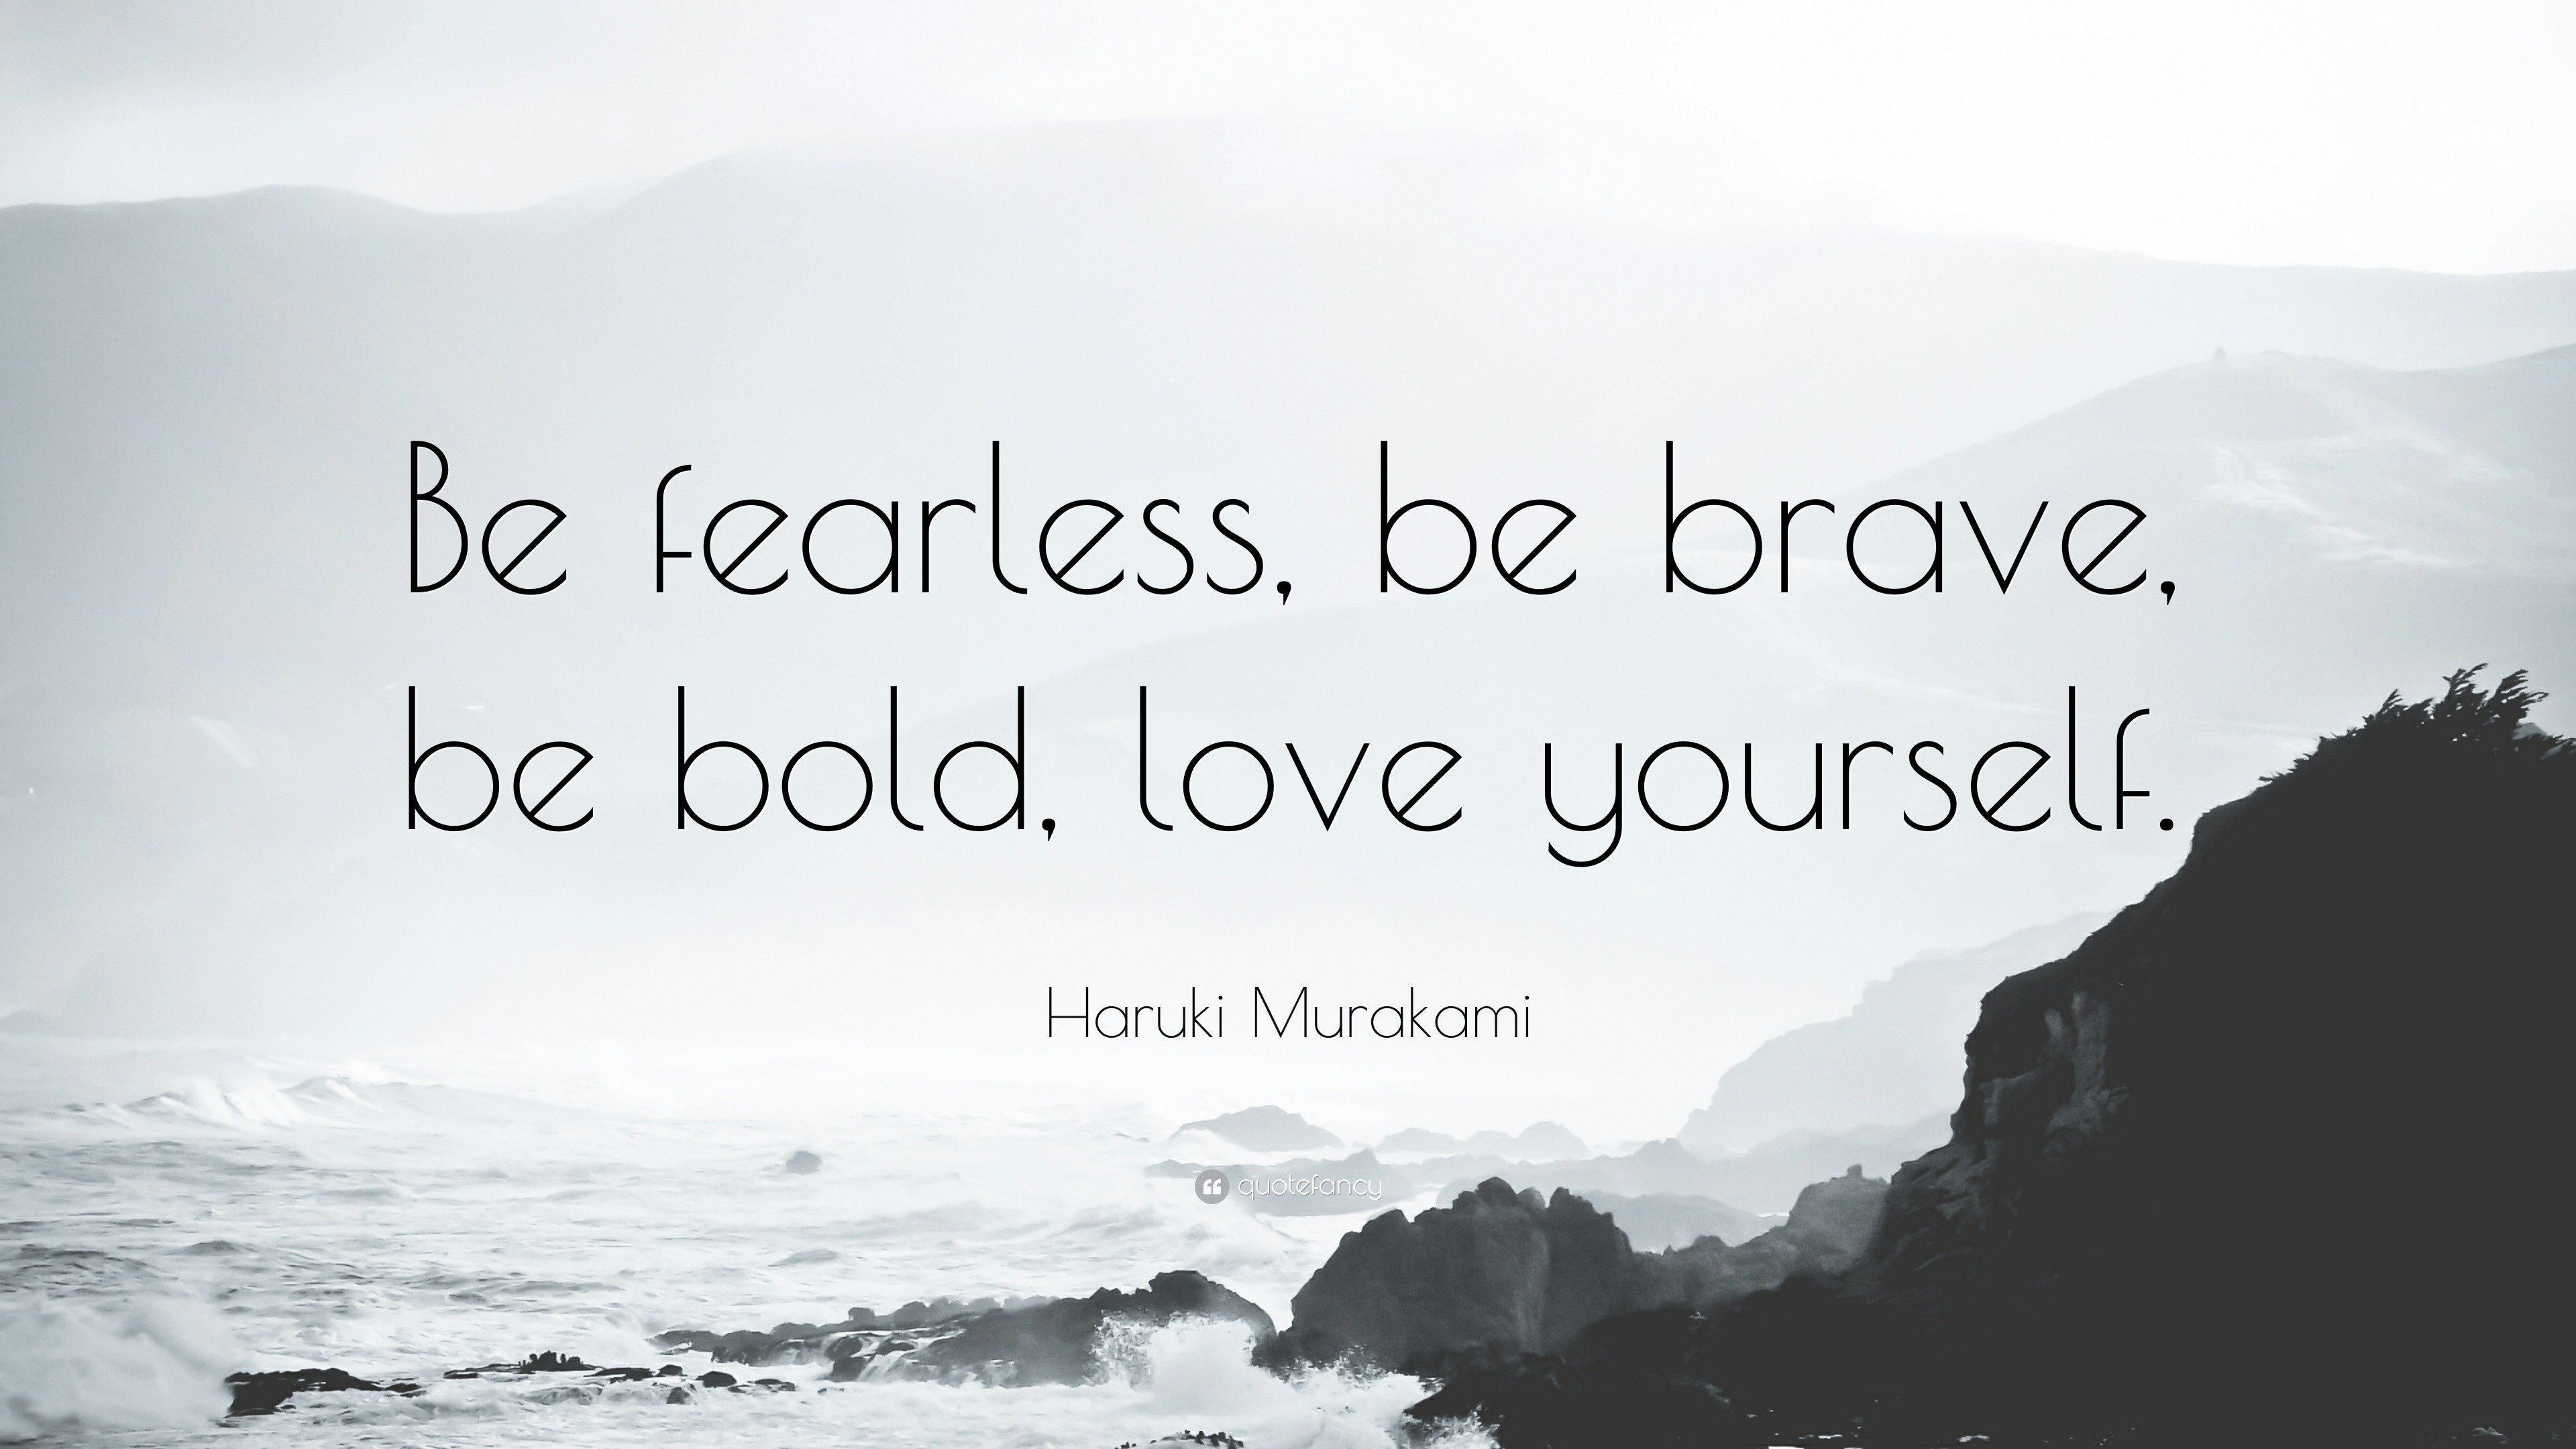 https://quotefancy.com/media/wallpaper/3840x2160/165081-Haruki-Murakami-Quote-Be-fearless-be-brave-be-bold-love-yourself.jpg